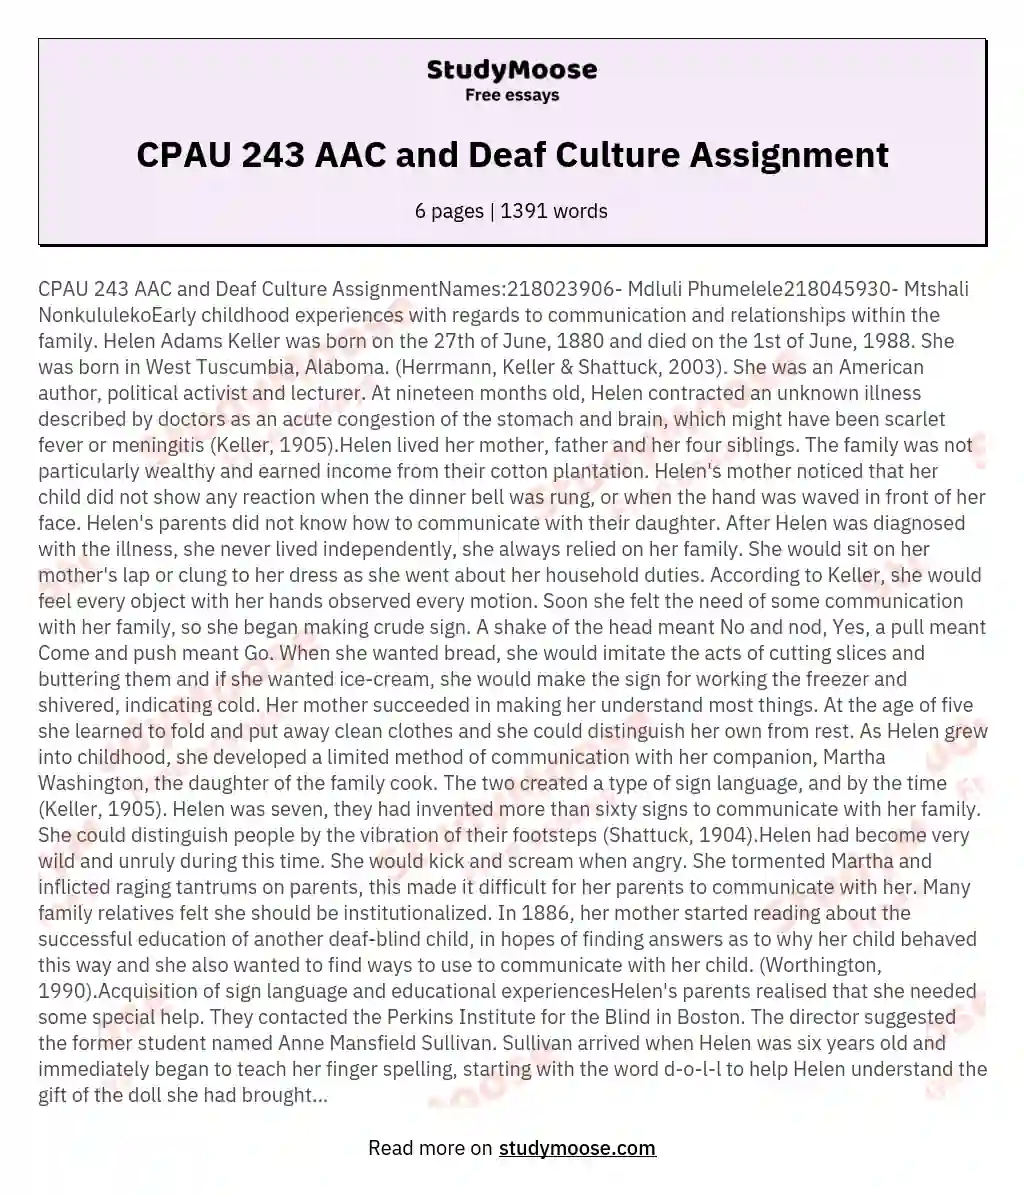 CPAU 243 AAC and Deaf Culture Assignment essay